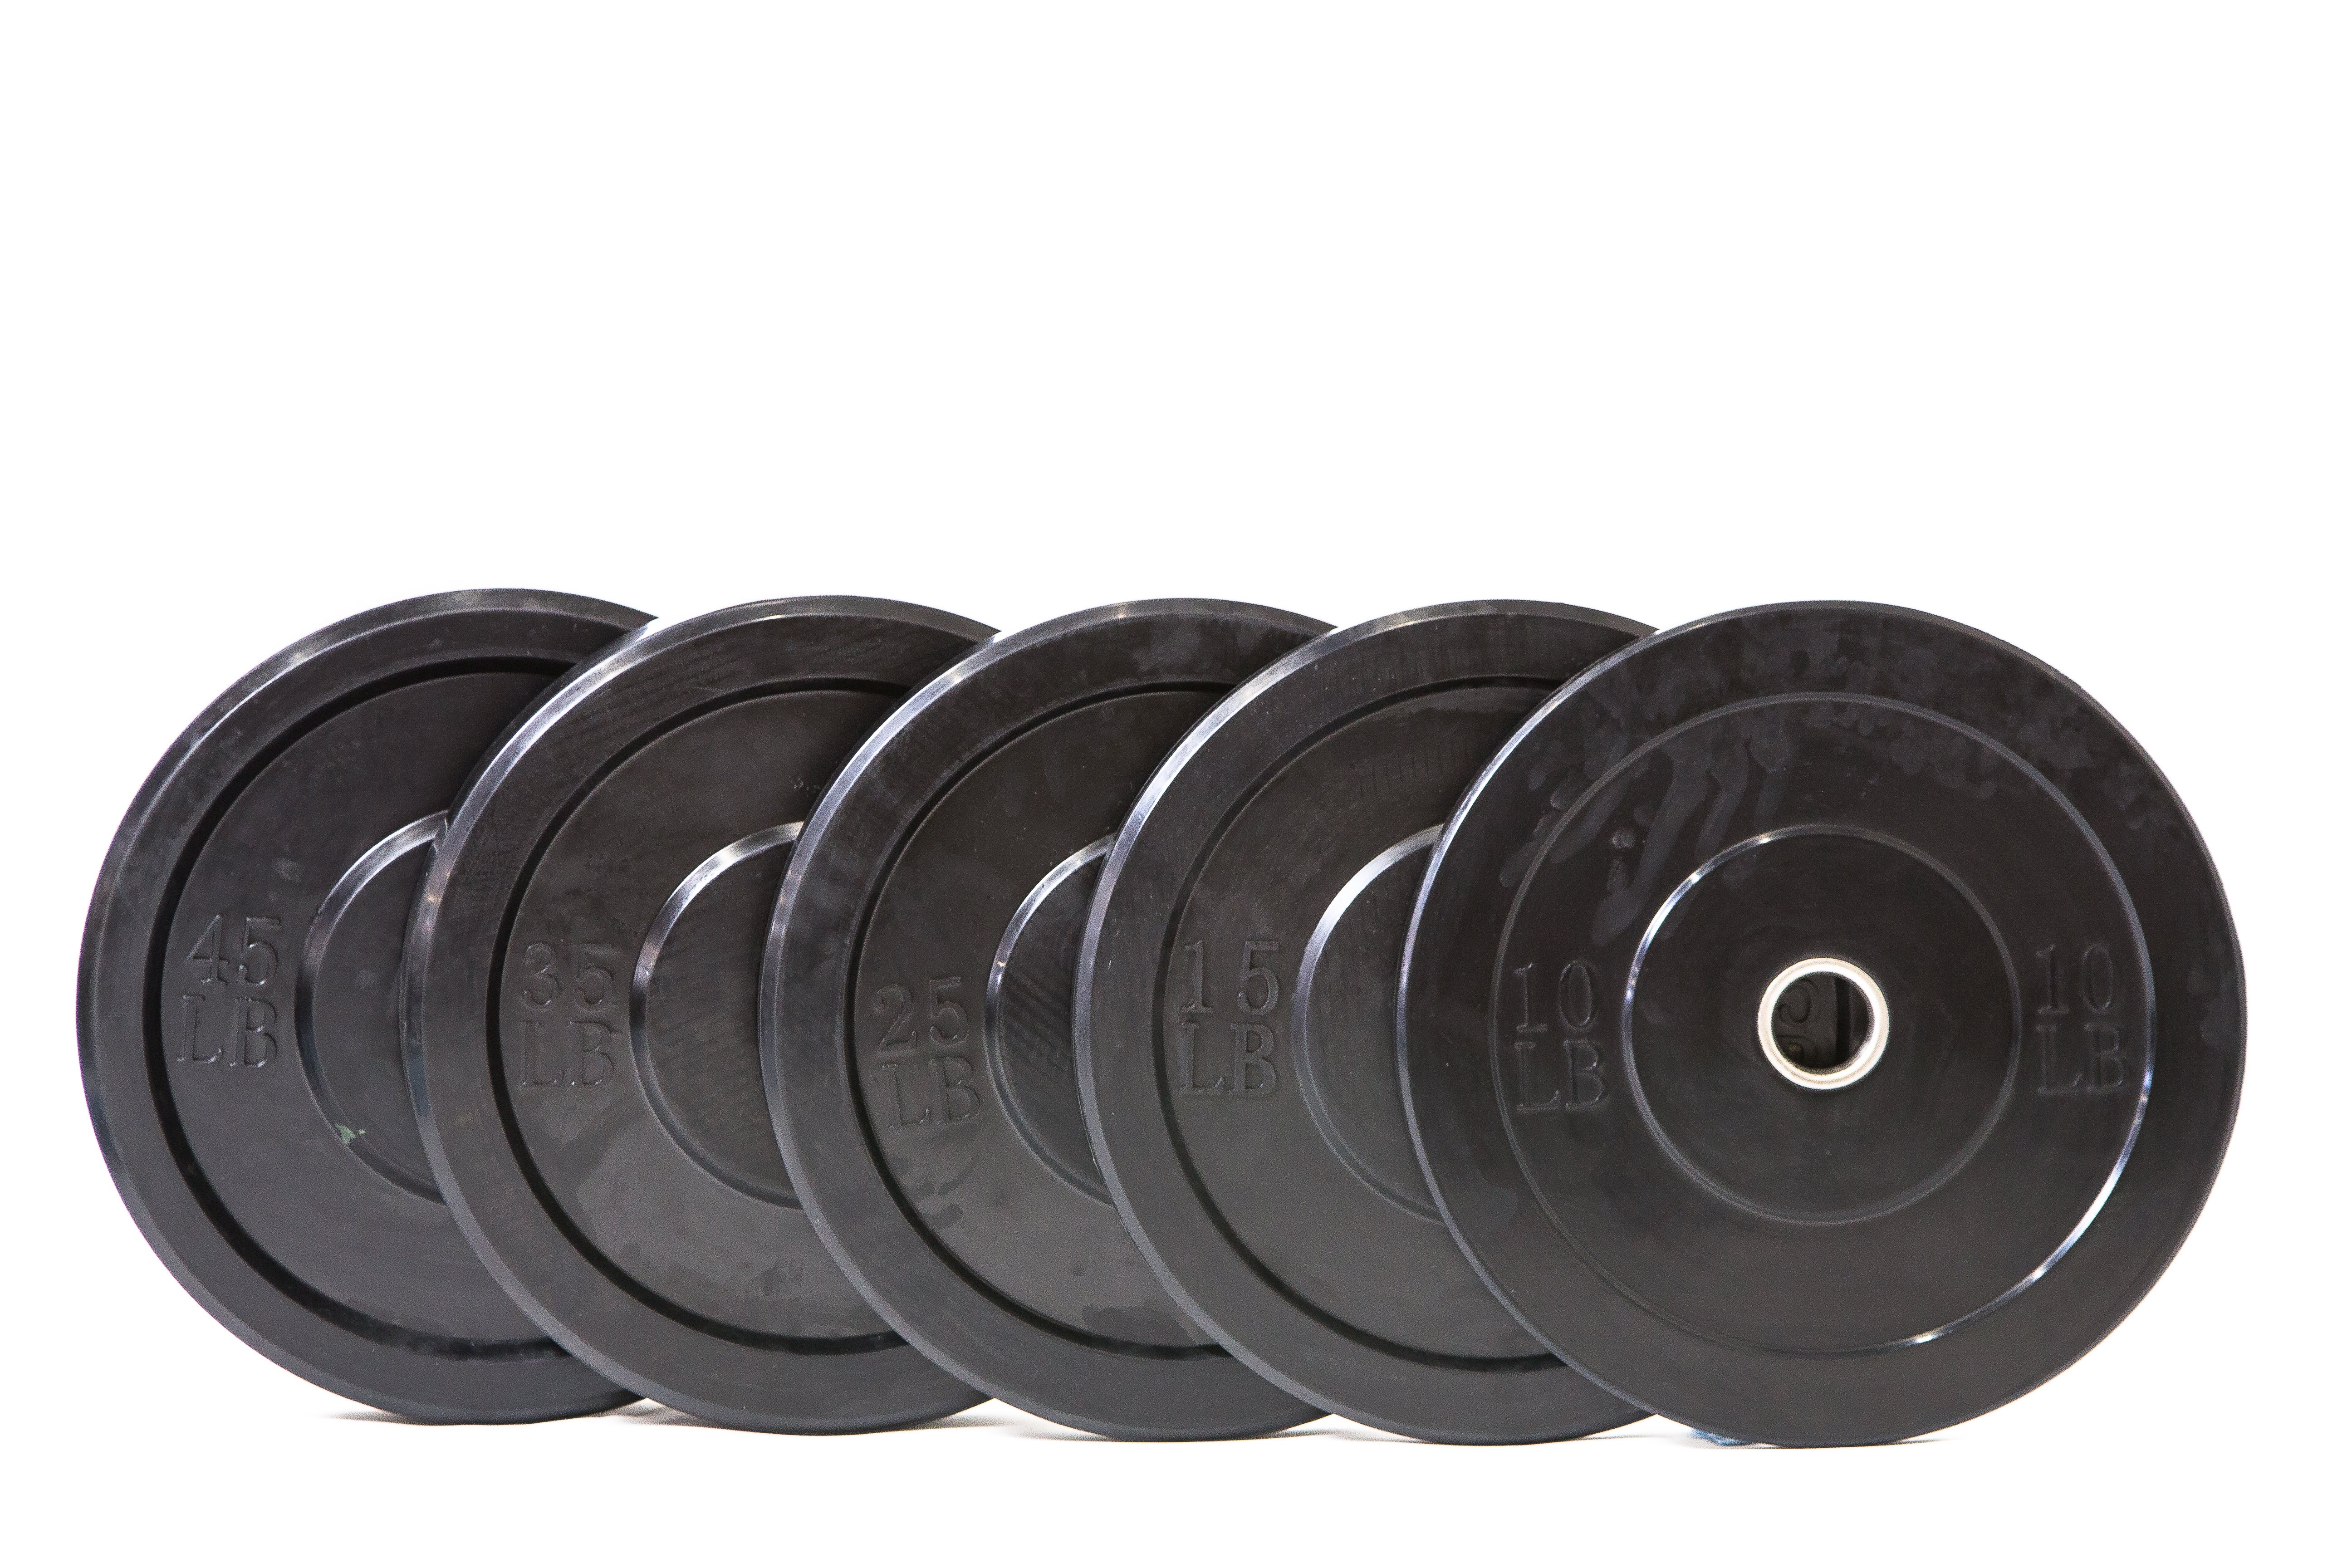 Standard Black Bumper Plates – The Fitness Armory